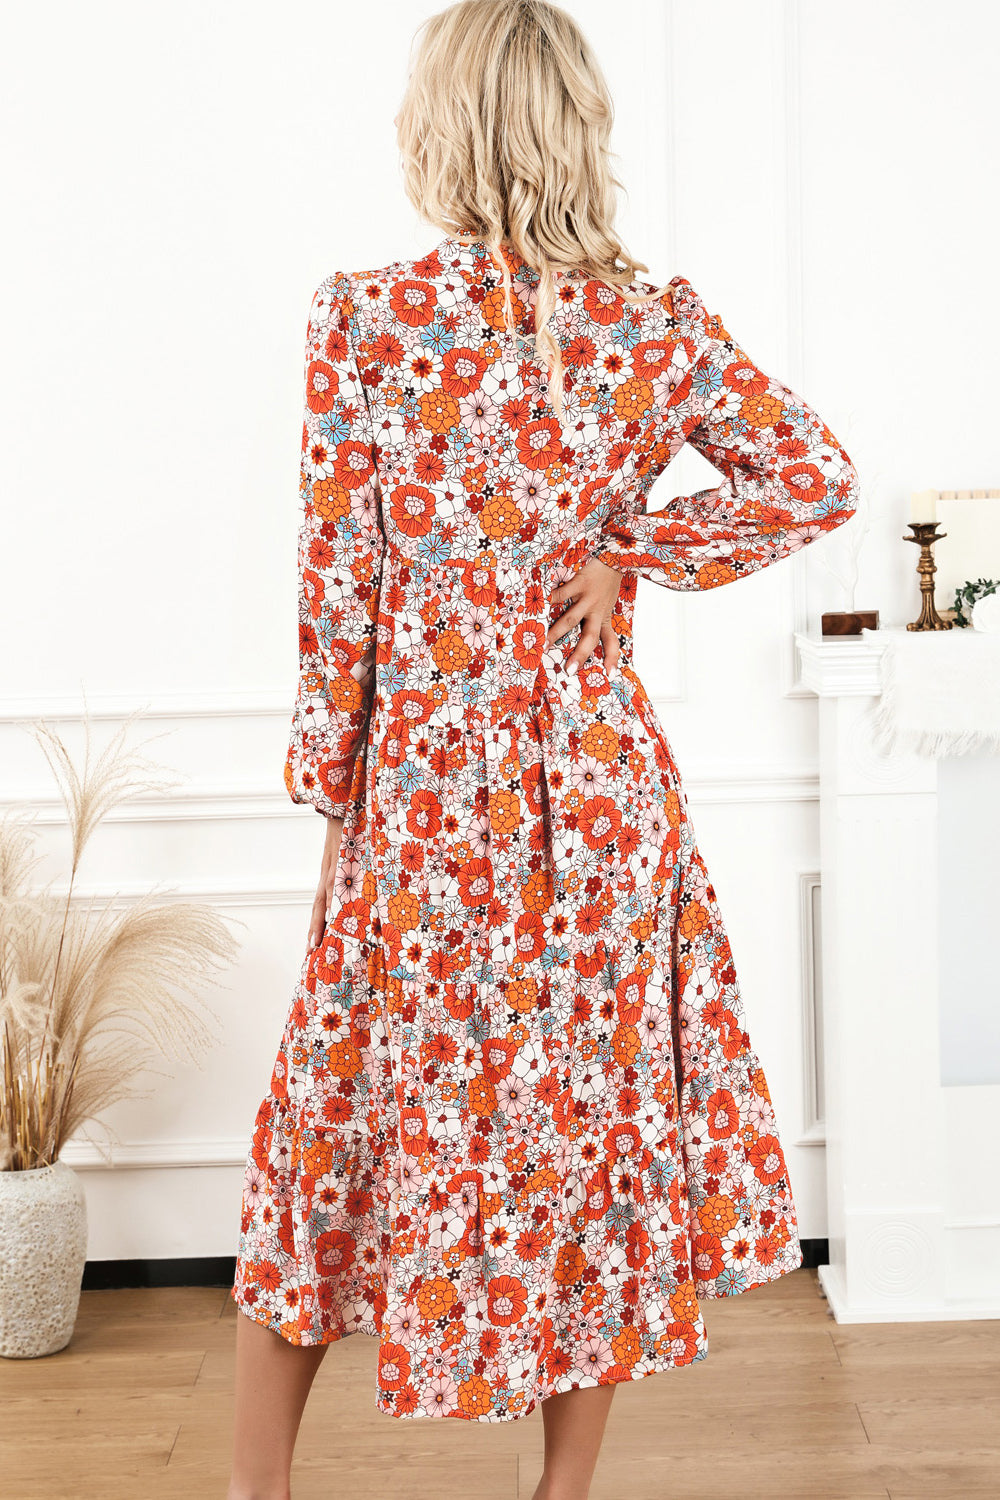 Floral Notched Neck Long Sleeve Dress - Tophatter Deals and Online Shopping - Electronics, Jewelry, Beauty, Health, Gadgets, Fashion - Tophatter's Discounts & Offers - tophatters - tophatters.co